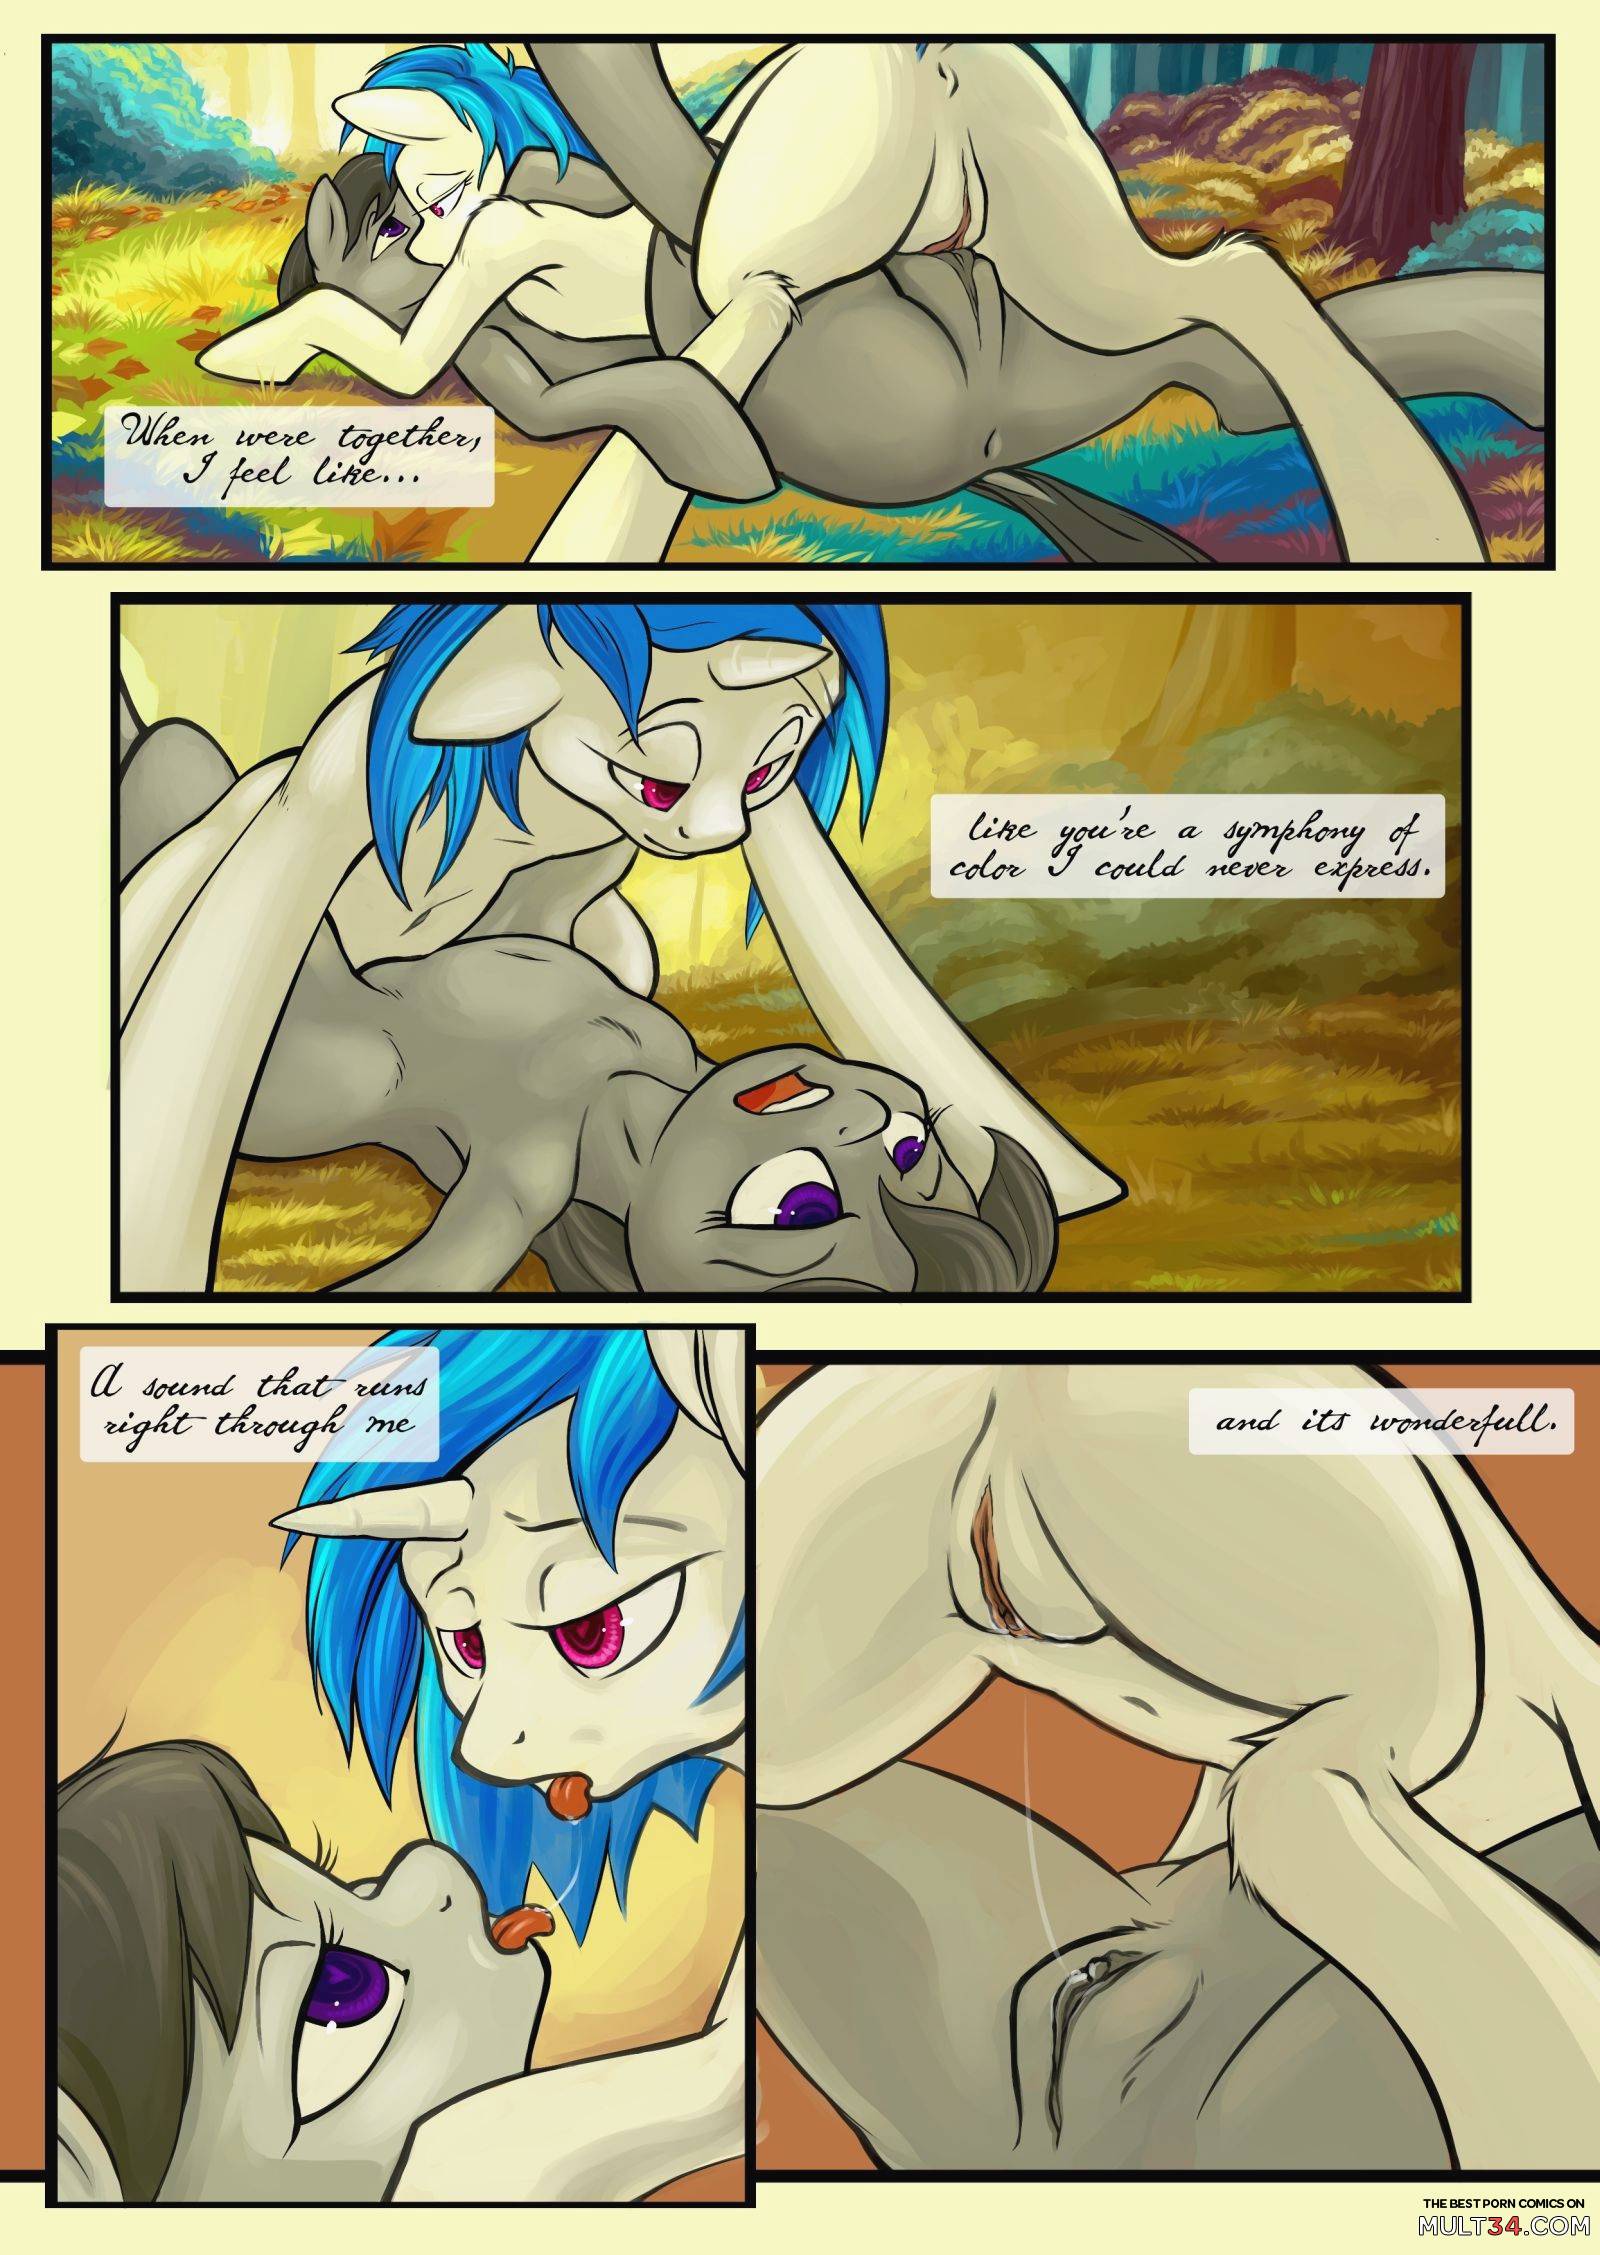 PlayPony Issue 2 page 25